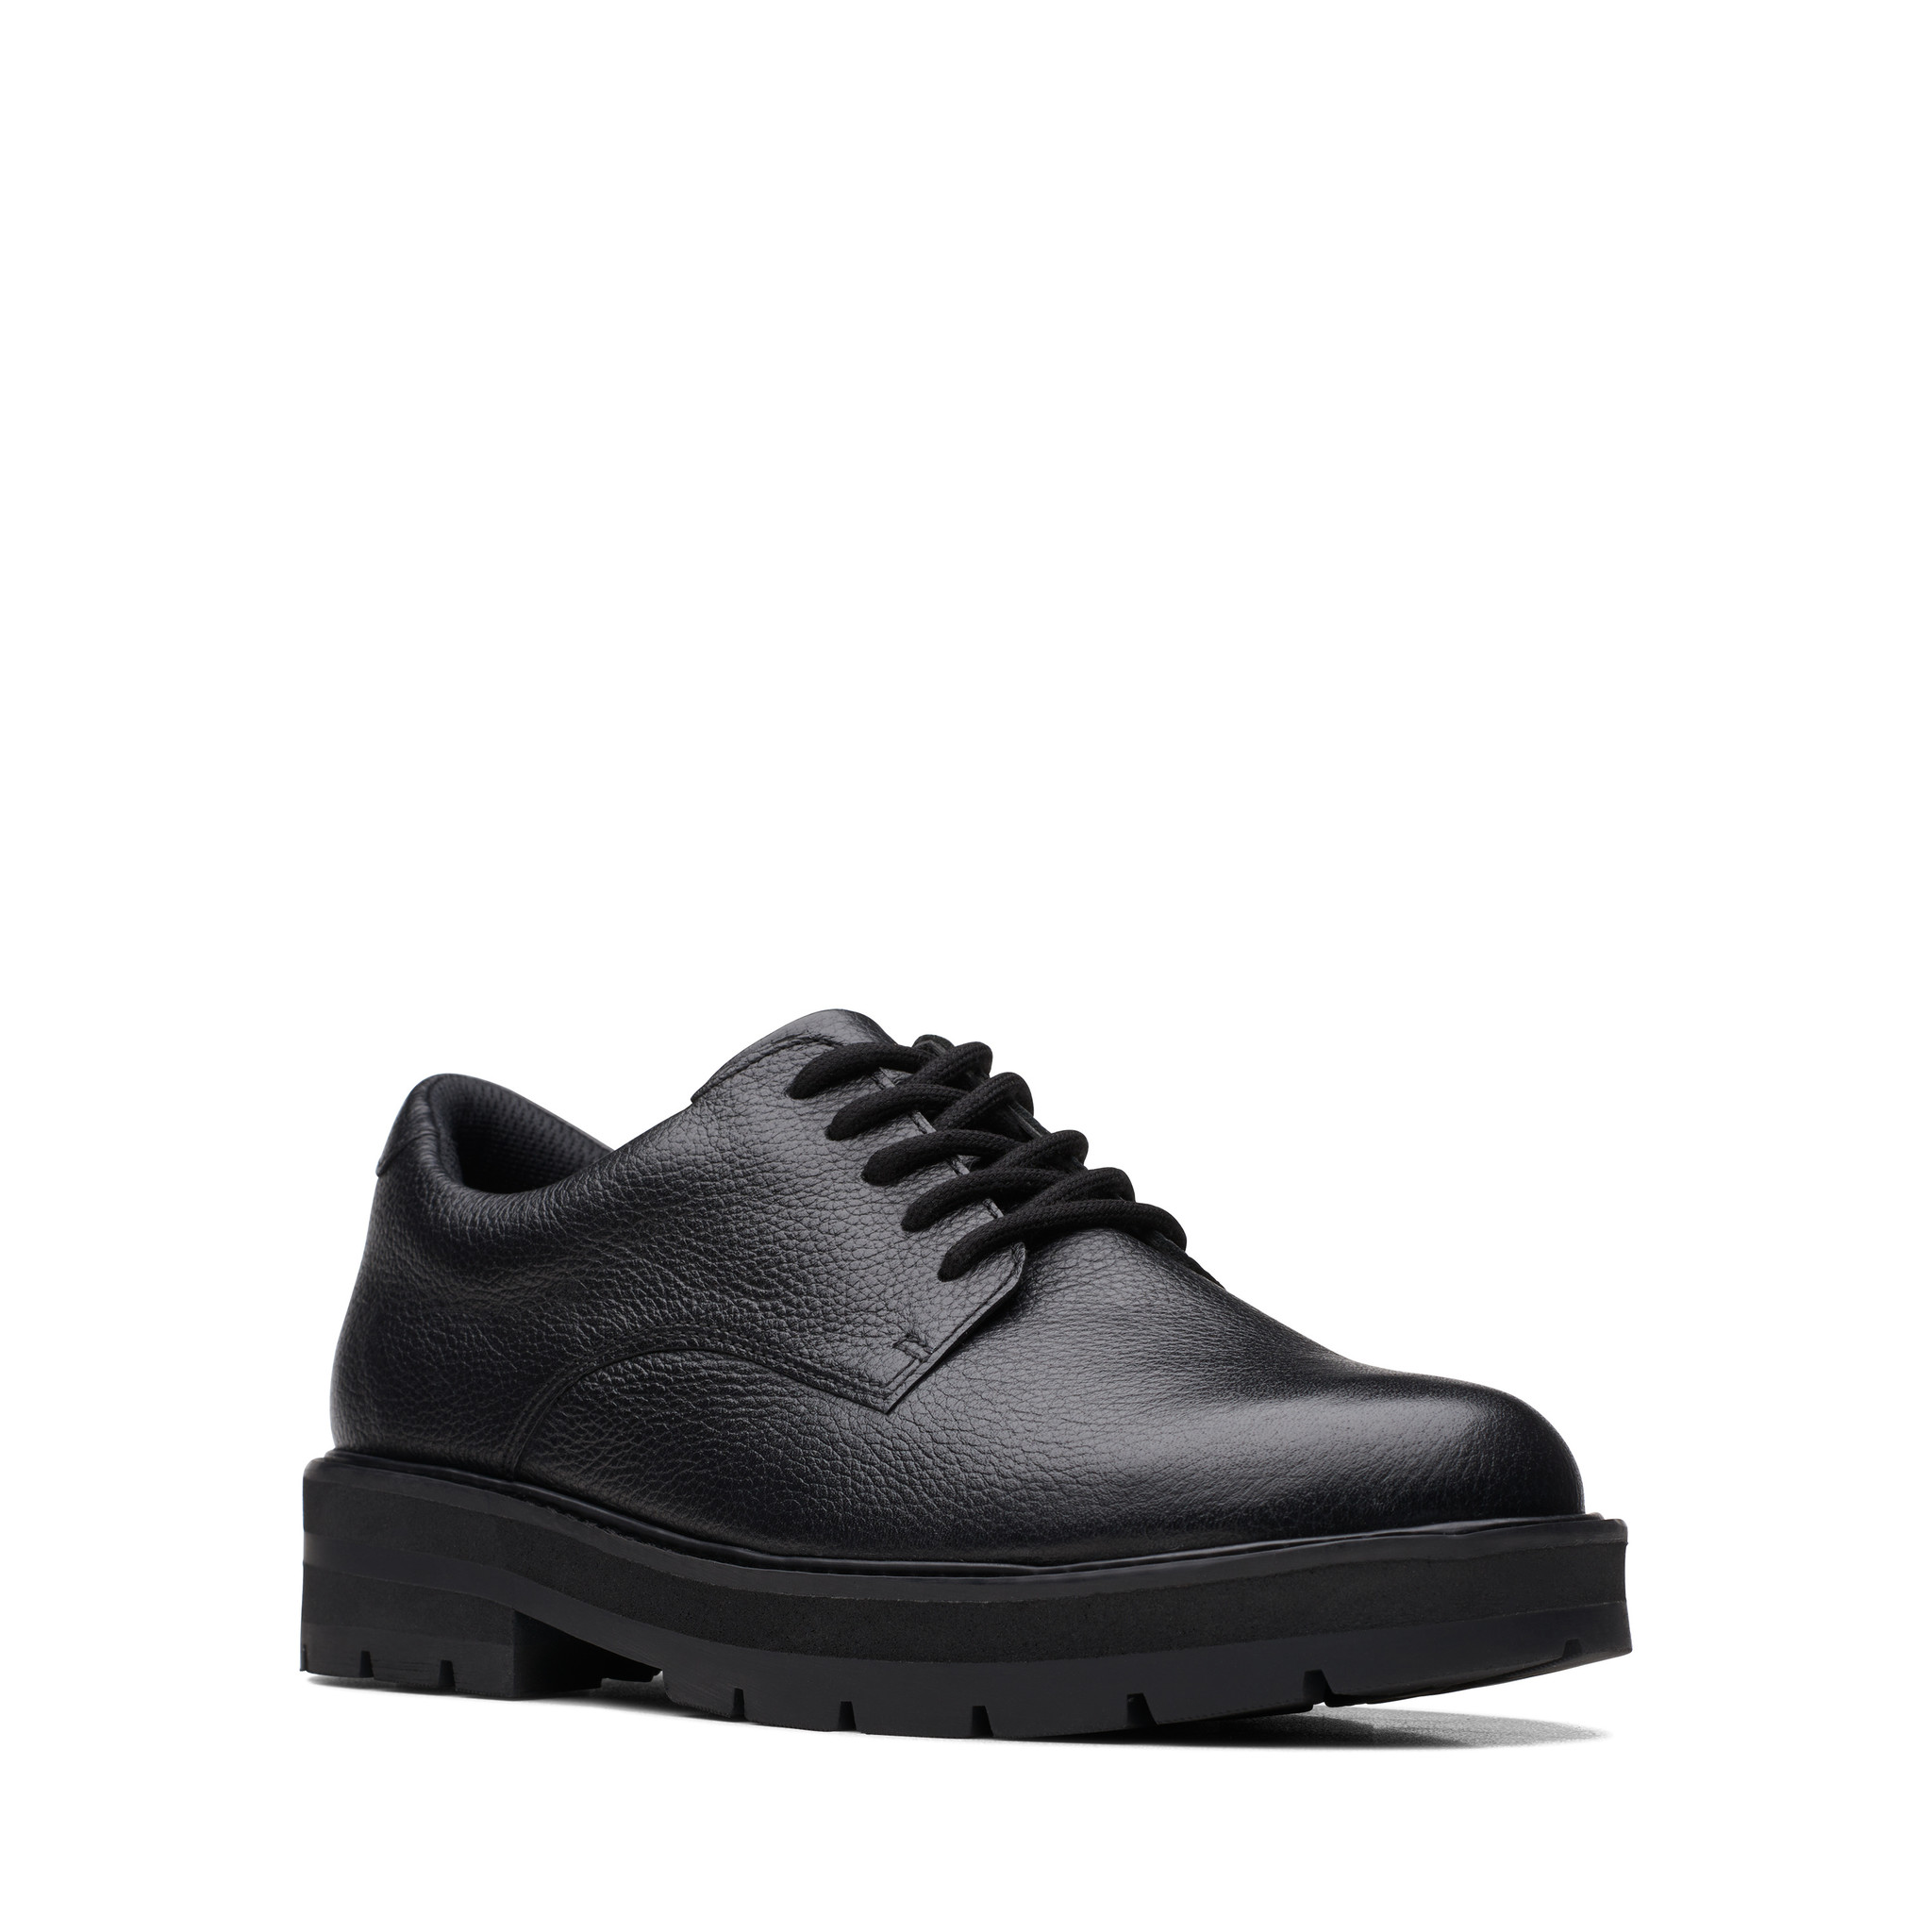 Clarks Prague Lace Black Leather Youth